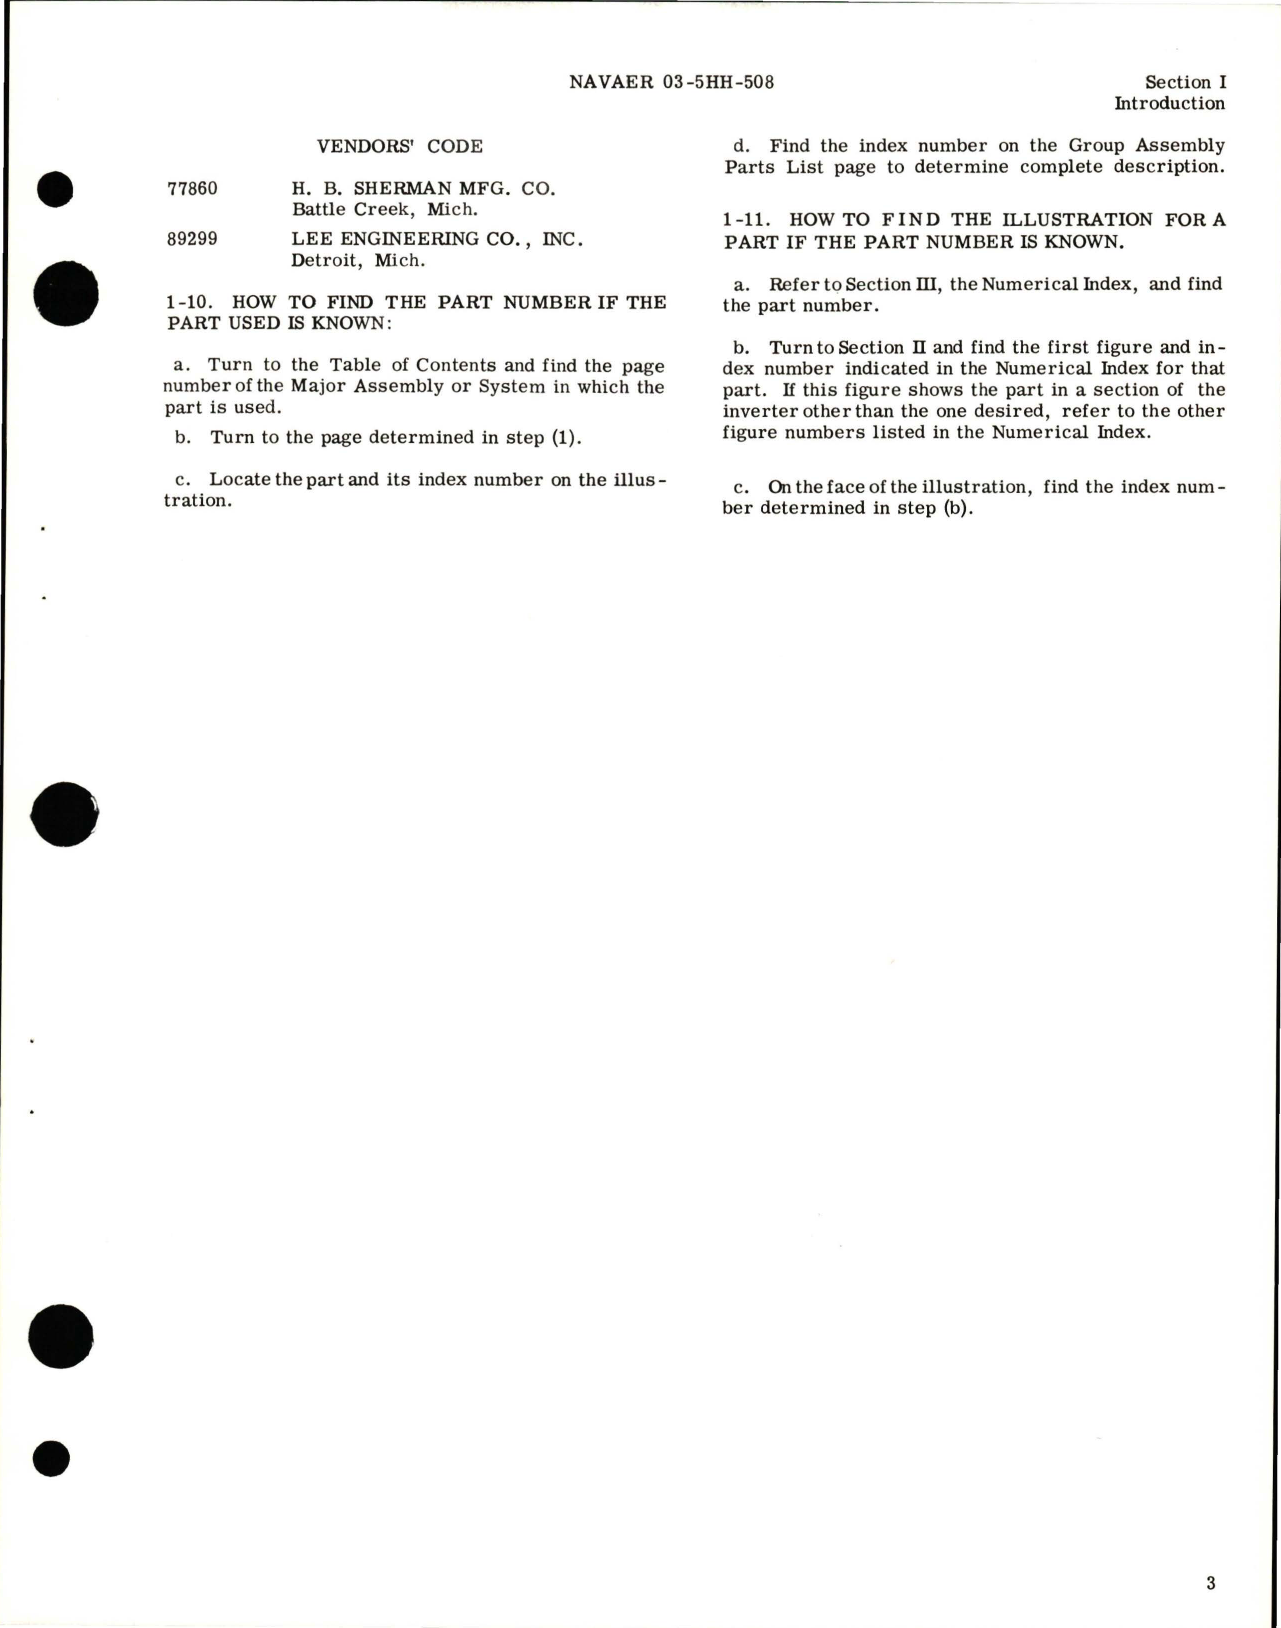 Sample page 7 from AirCorps Library document: Illustrated Parts Breakdown for Inverter - Part MGE-57-1 